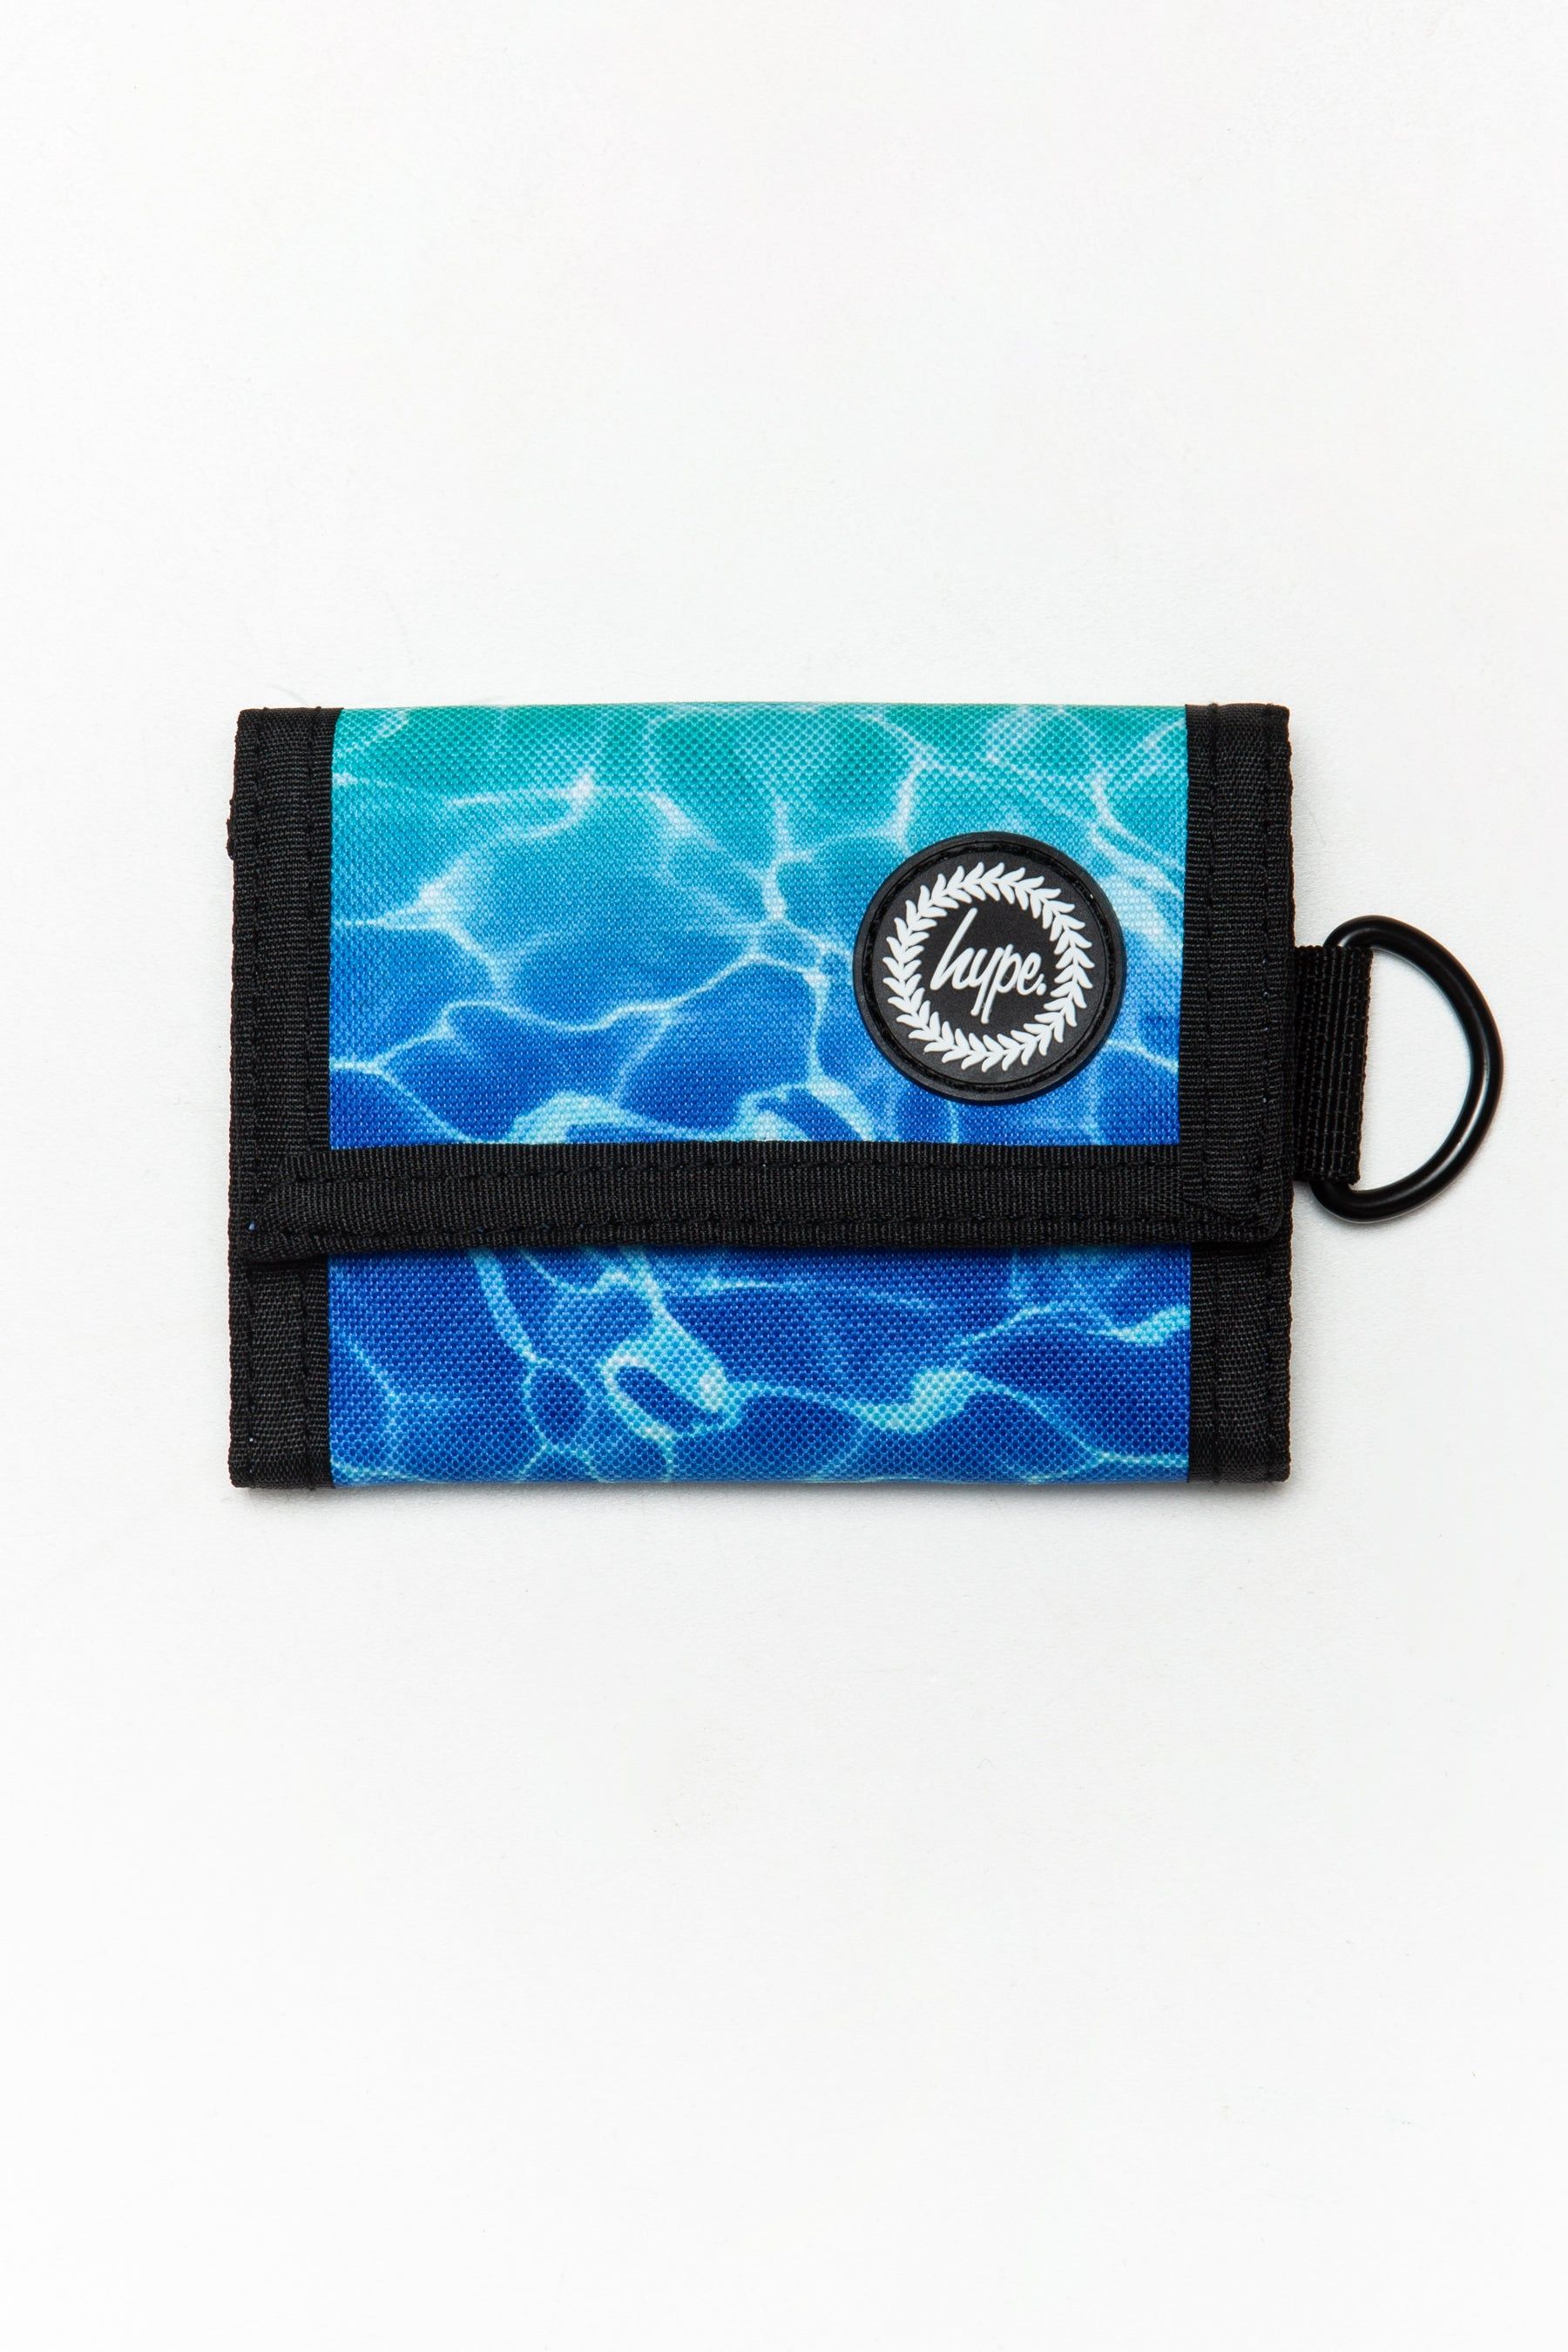 let us introduce you to the HYPE. Pool Fade Wallet. A unisex wallet shape and design, creating the perfect lightweight wallet you need as your money and card holder. Featuring an all-over swimming pool water inspired print in a green, turquoise and blue gradient fade colour palette. Finished with Velcro fastening and the iconic HYPE. crest logo in a raised rubber fabric. Wipe clean only.